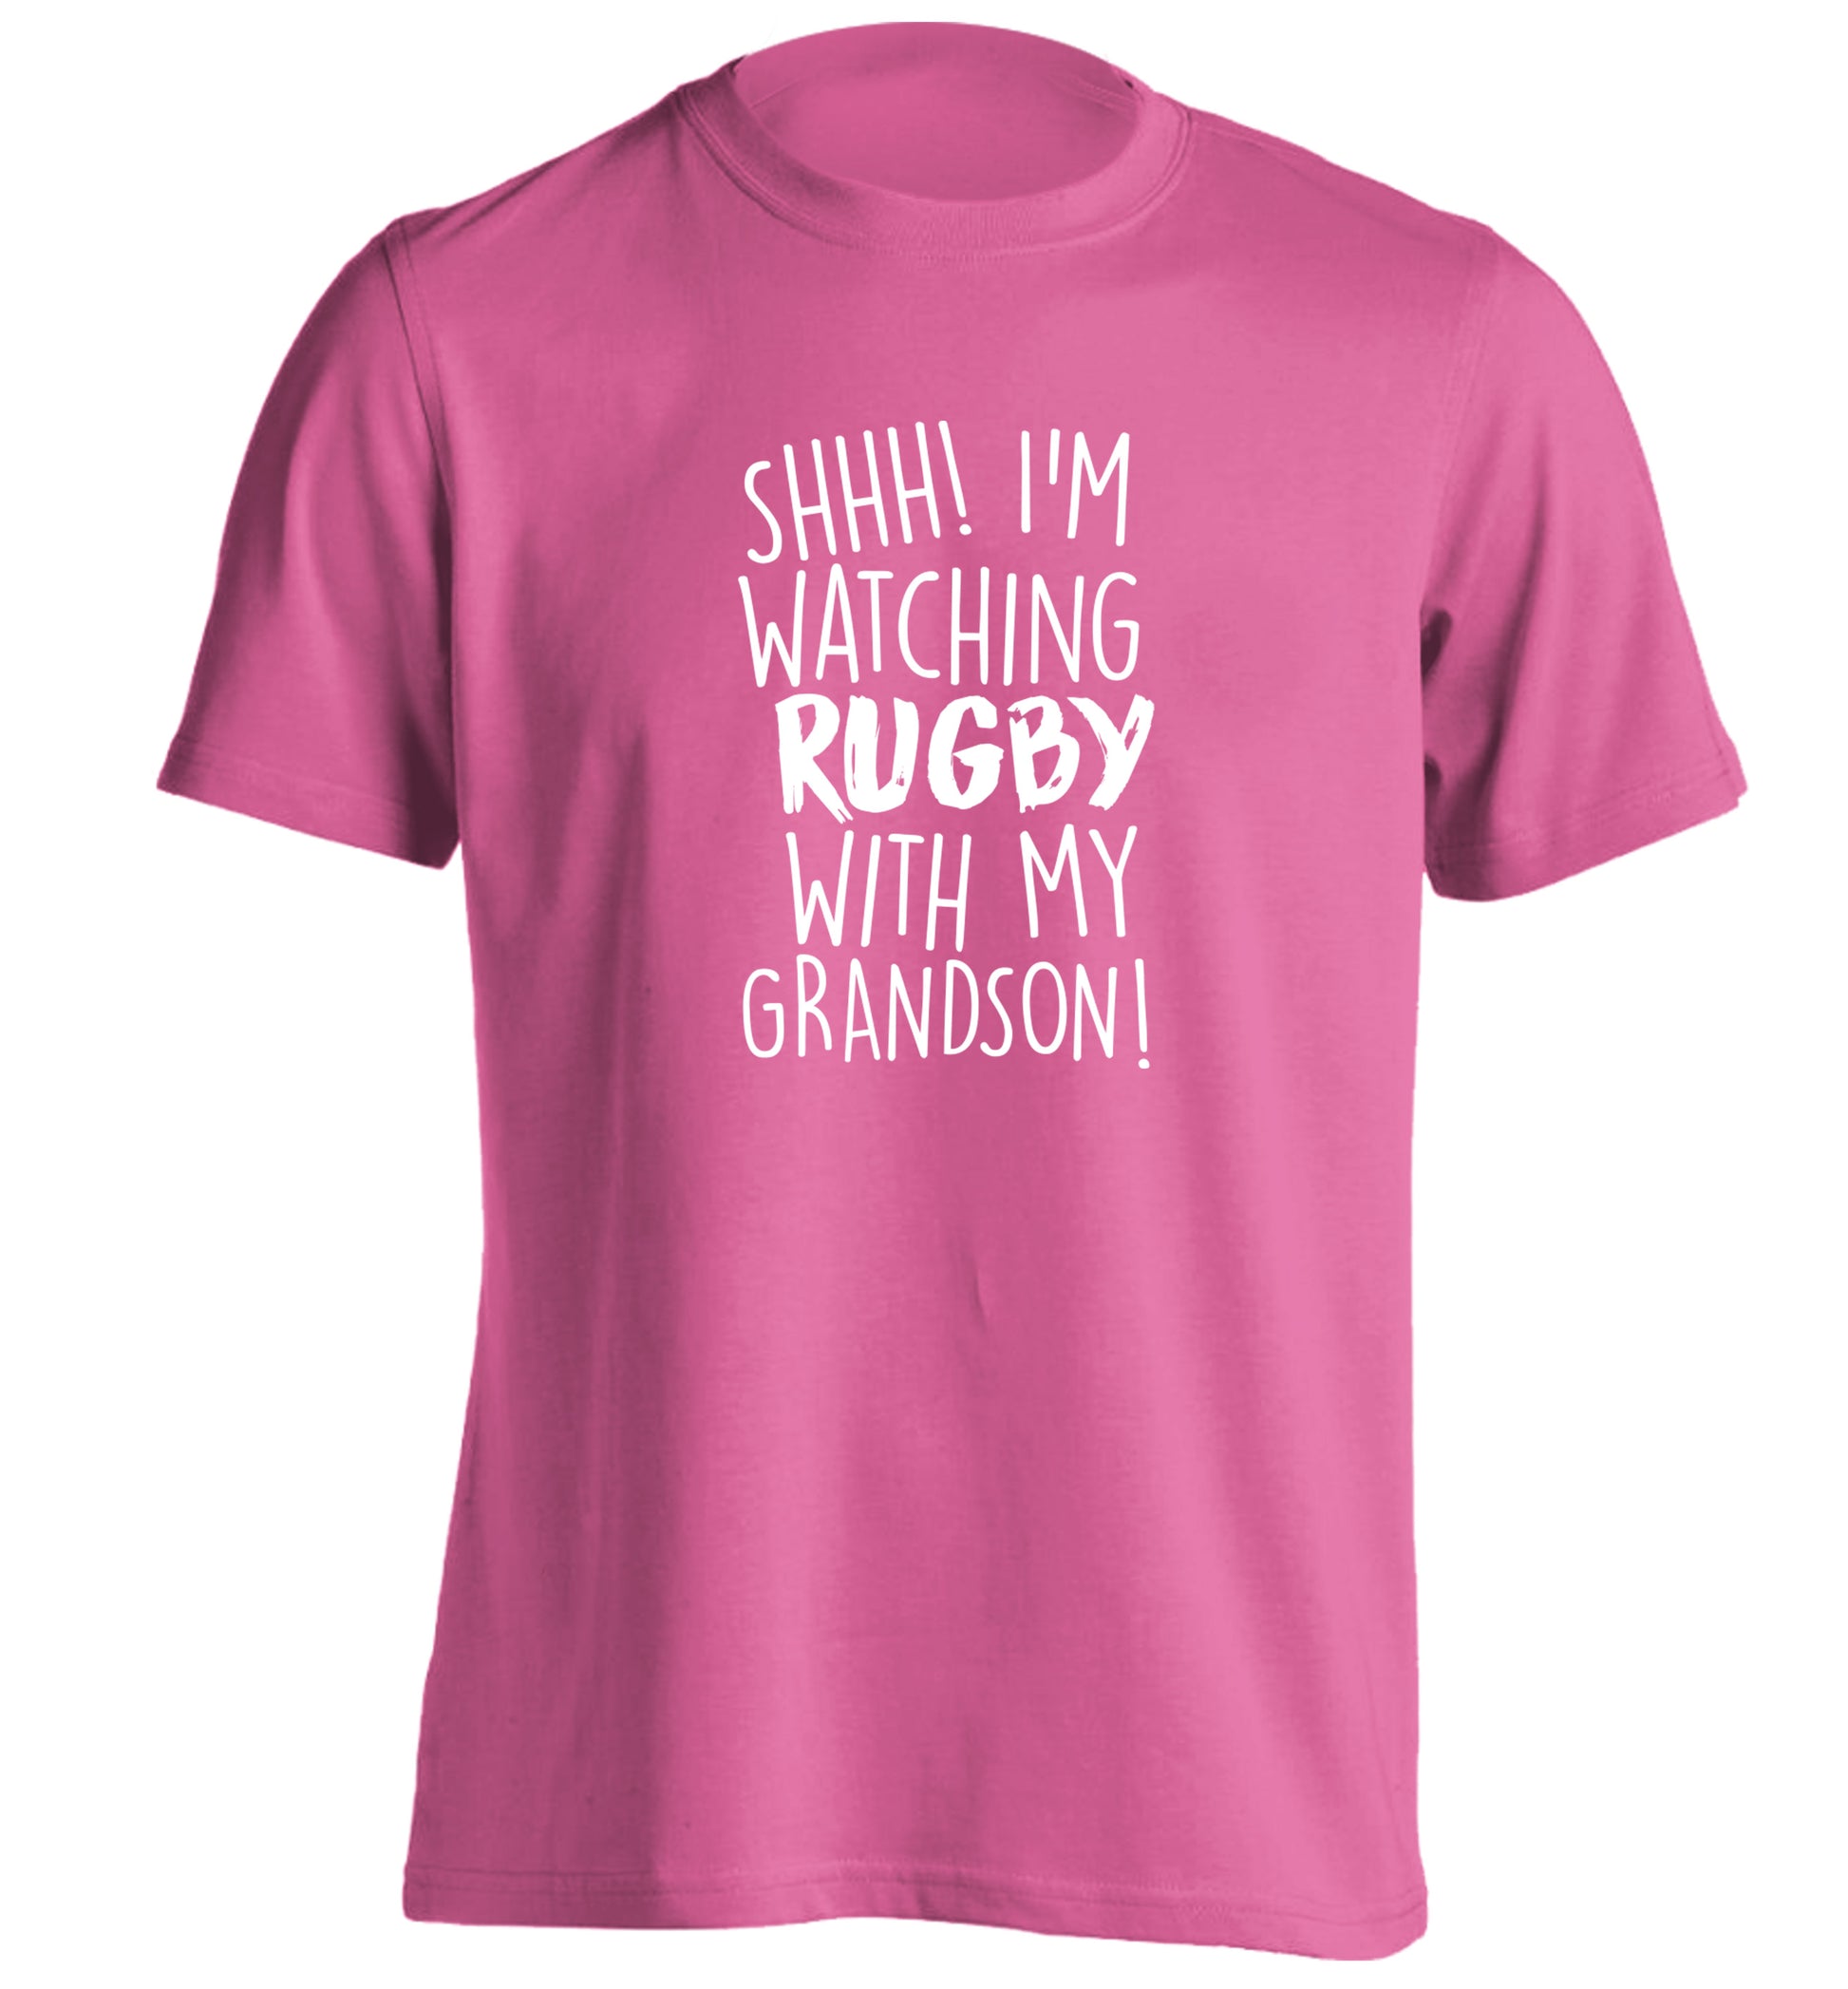 Shh I'm watching rugby with my grandson adults unisex pink Tshirt 2XL